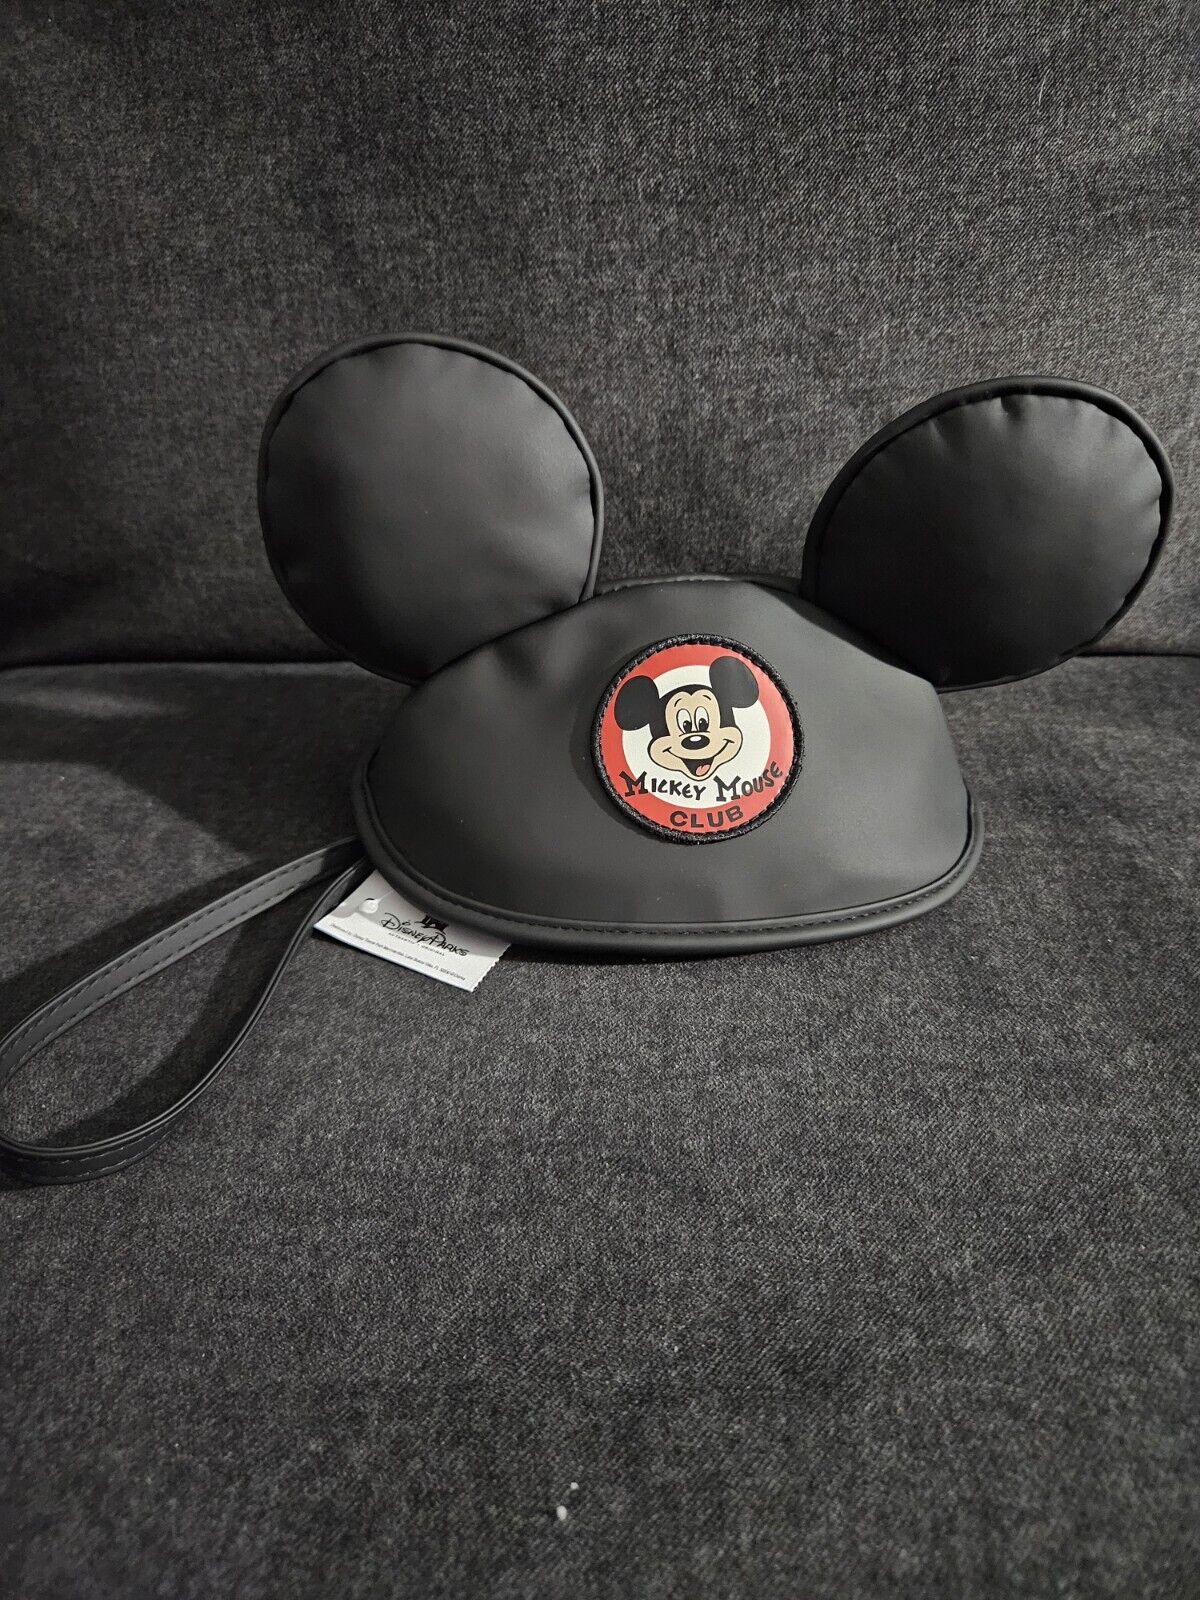 Disney Parks Mickey Mouse Club Ears Hat Zippered Wristlet Clutch Purse NEW